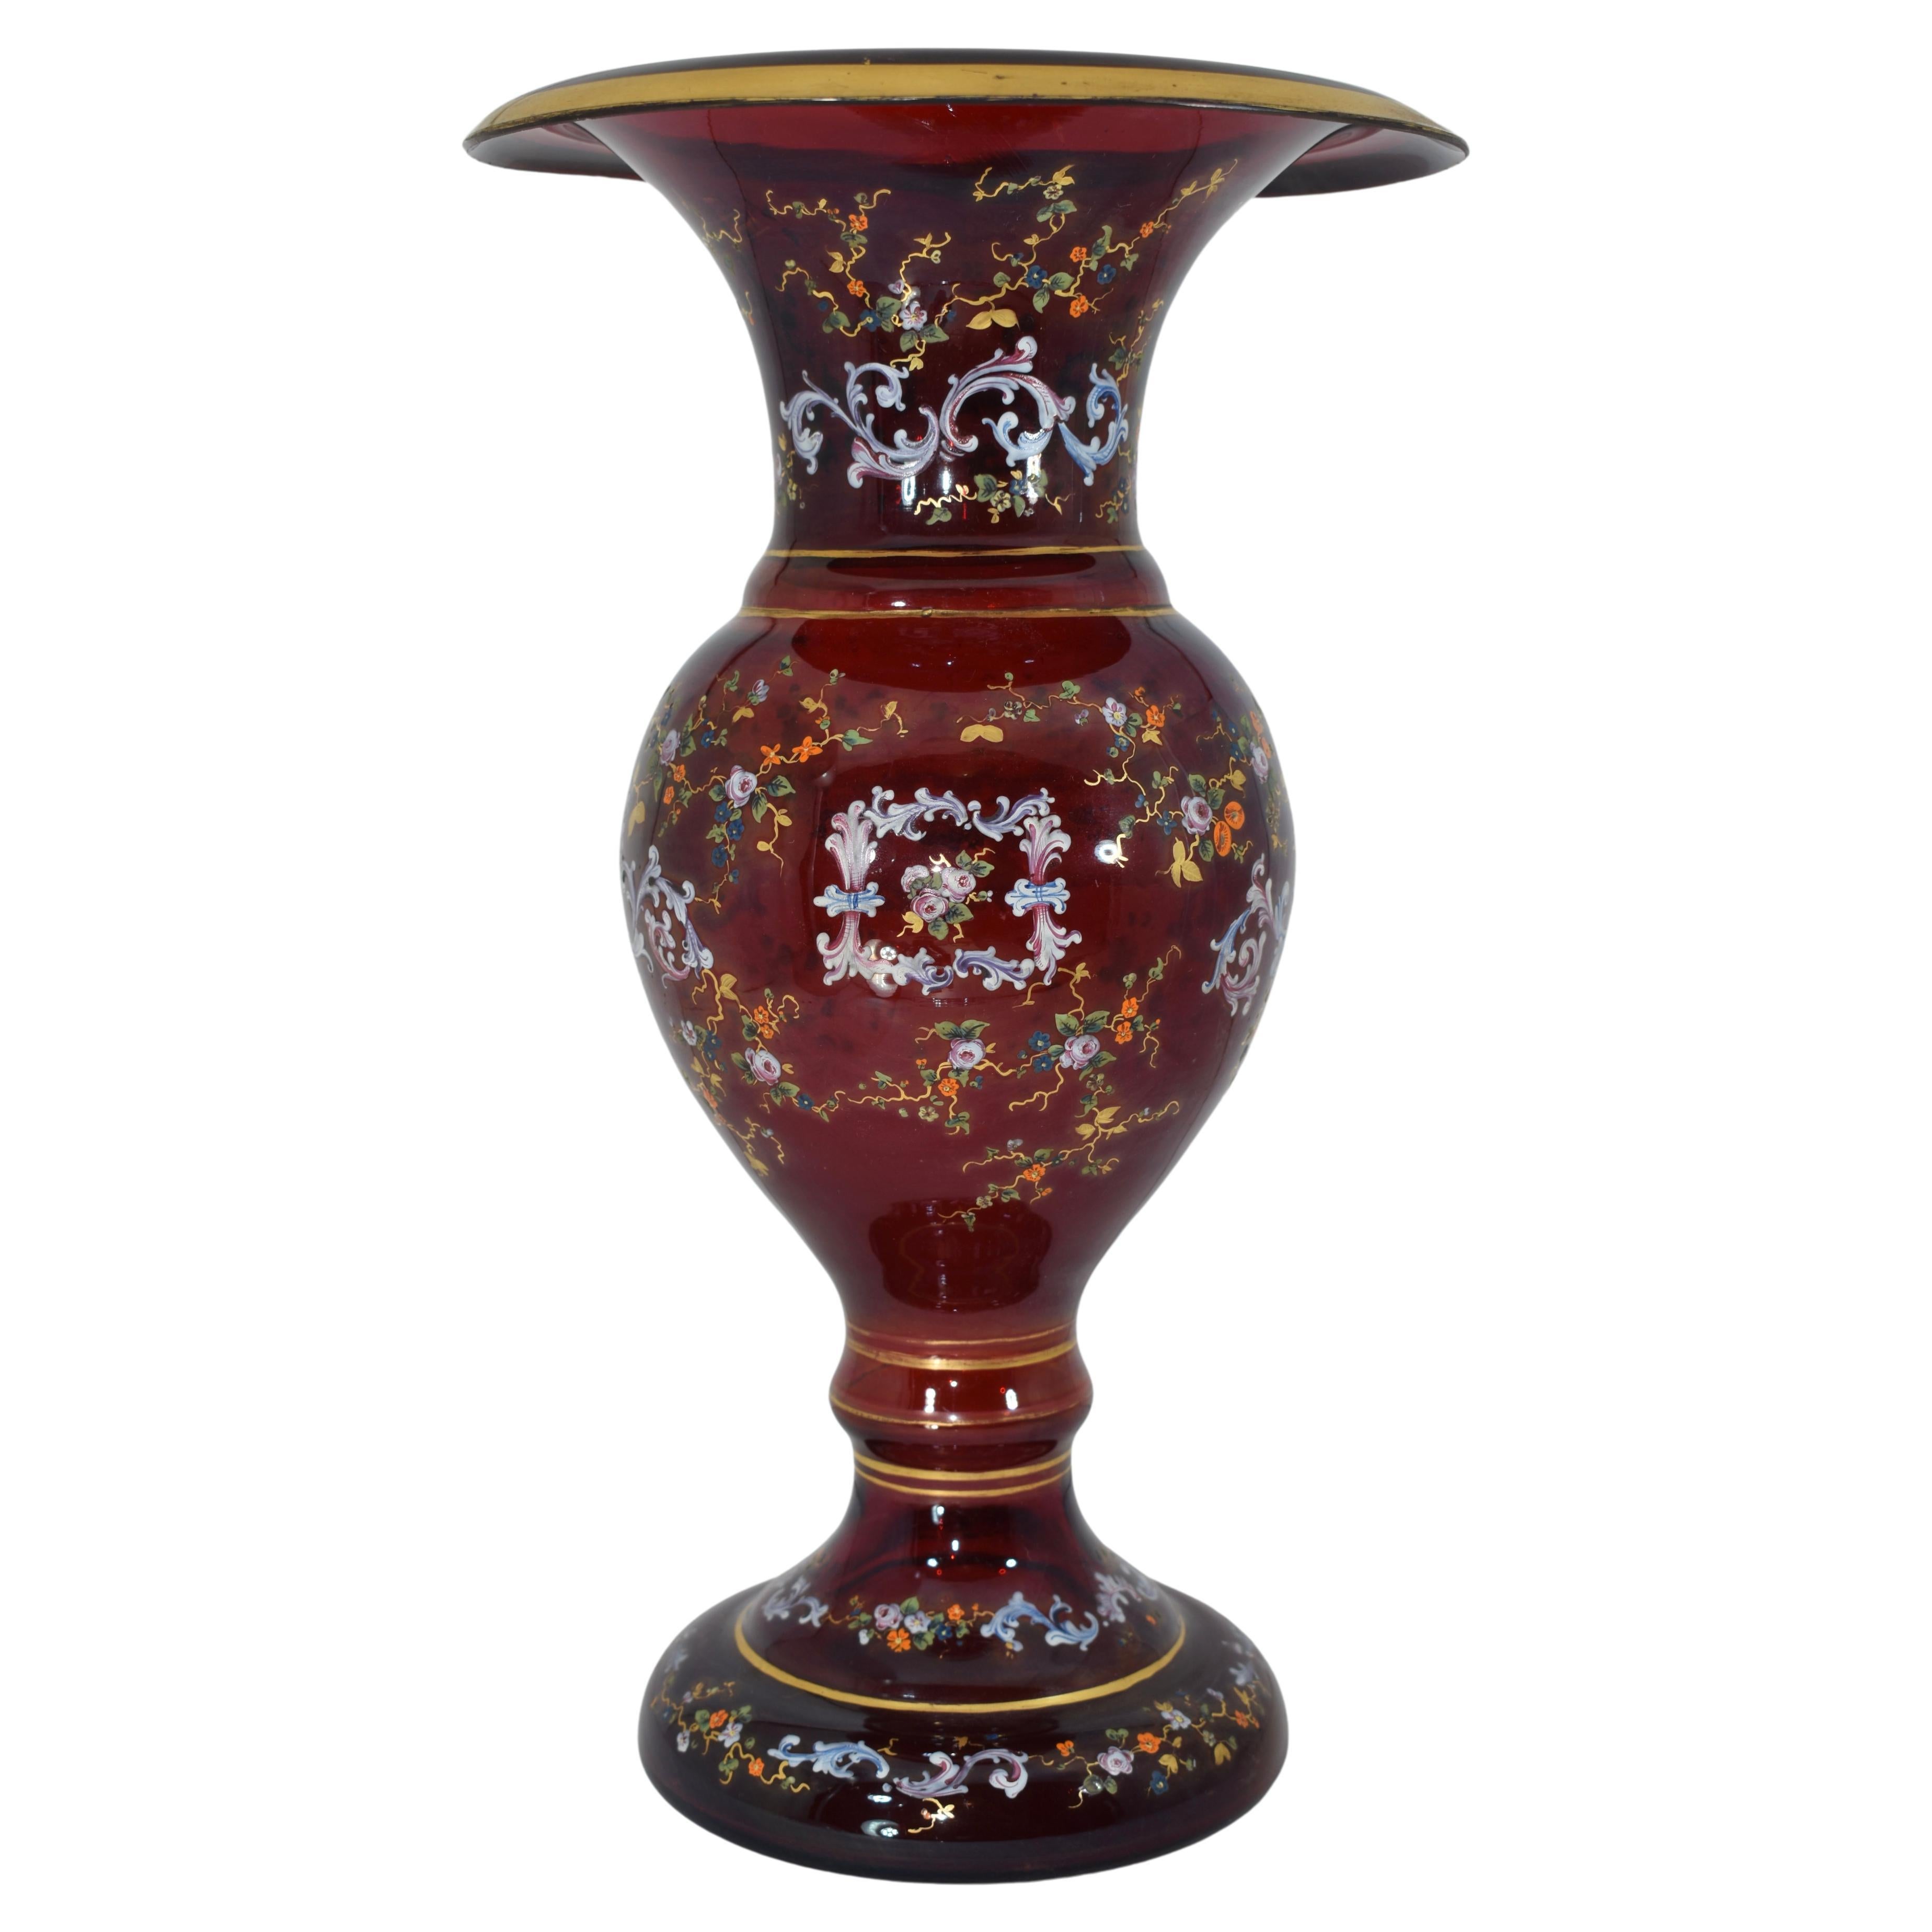 Pair of Antique Bohemian Enamelled Ruby Red Glass Vases, 19th Century In Good Condition For Sale In Rostock, MV